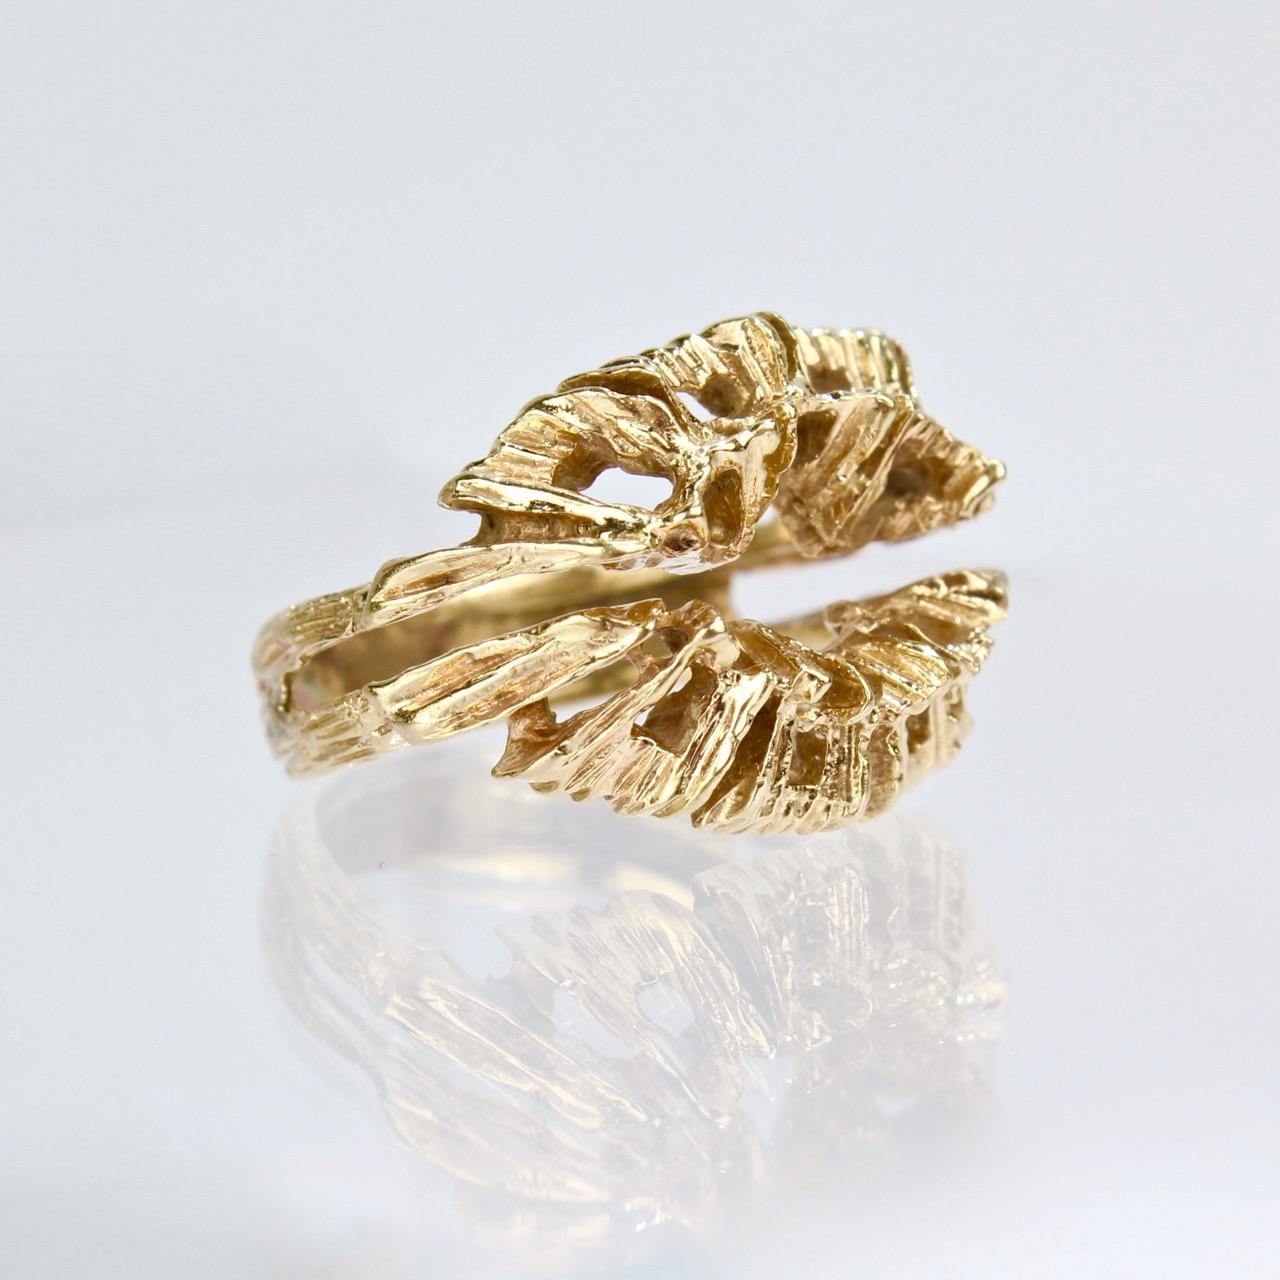 A fine, bench made Brutalist 14-karat gold ring.

With a split shank, the ring is finely cast and has burnished surface.

The crown has a matrix structure that is reminiscent of some futurist structure and an archaic honey comb relict. Both